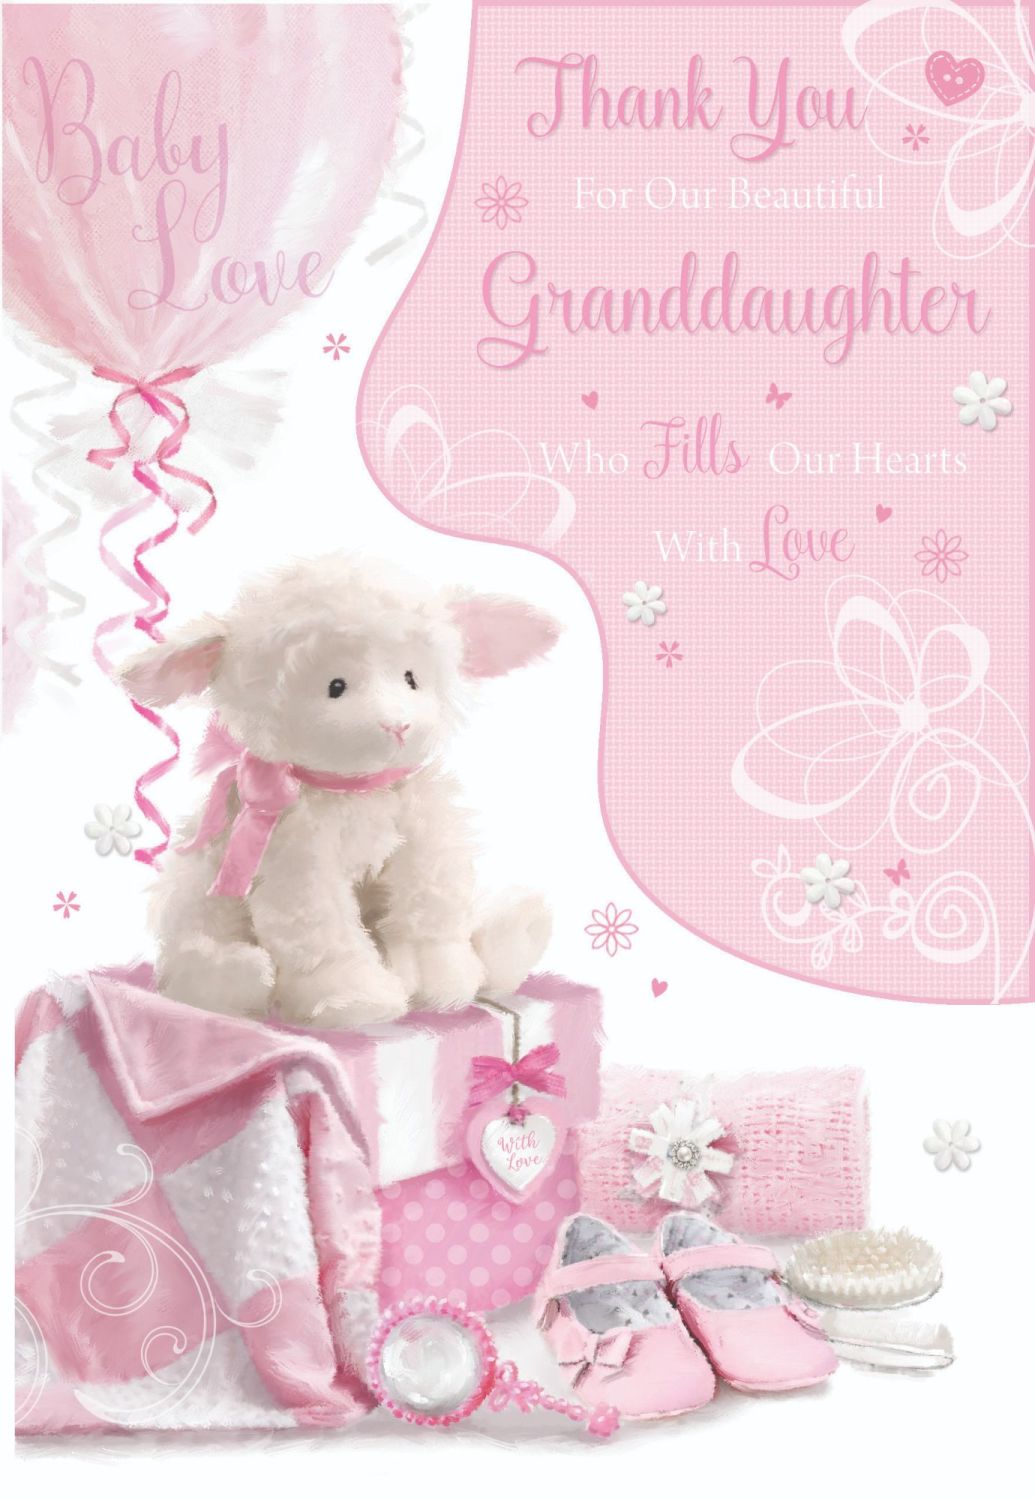 Thank you for a New Baby Granddaughter ~ greeting card